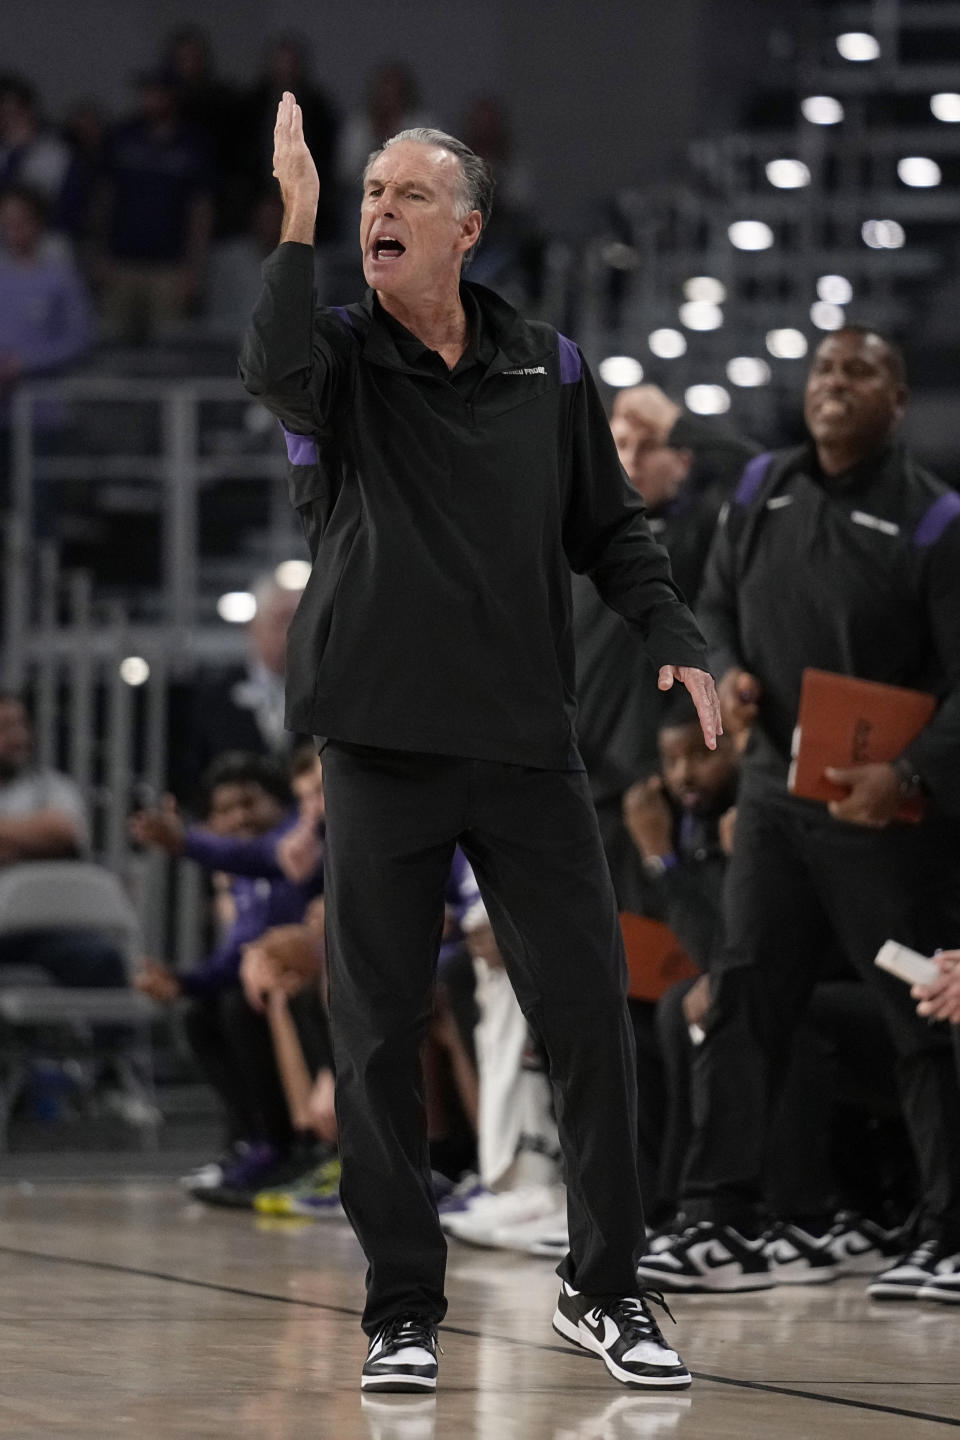 TCU head coach Jamie Dixon instructs his team in the first half of an NCAA college basketball game against SMU, Saturday, Dec. 10, 2022, in Fort Worth, Texas. (AP Photo/Tony Gutierrez)